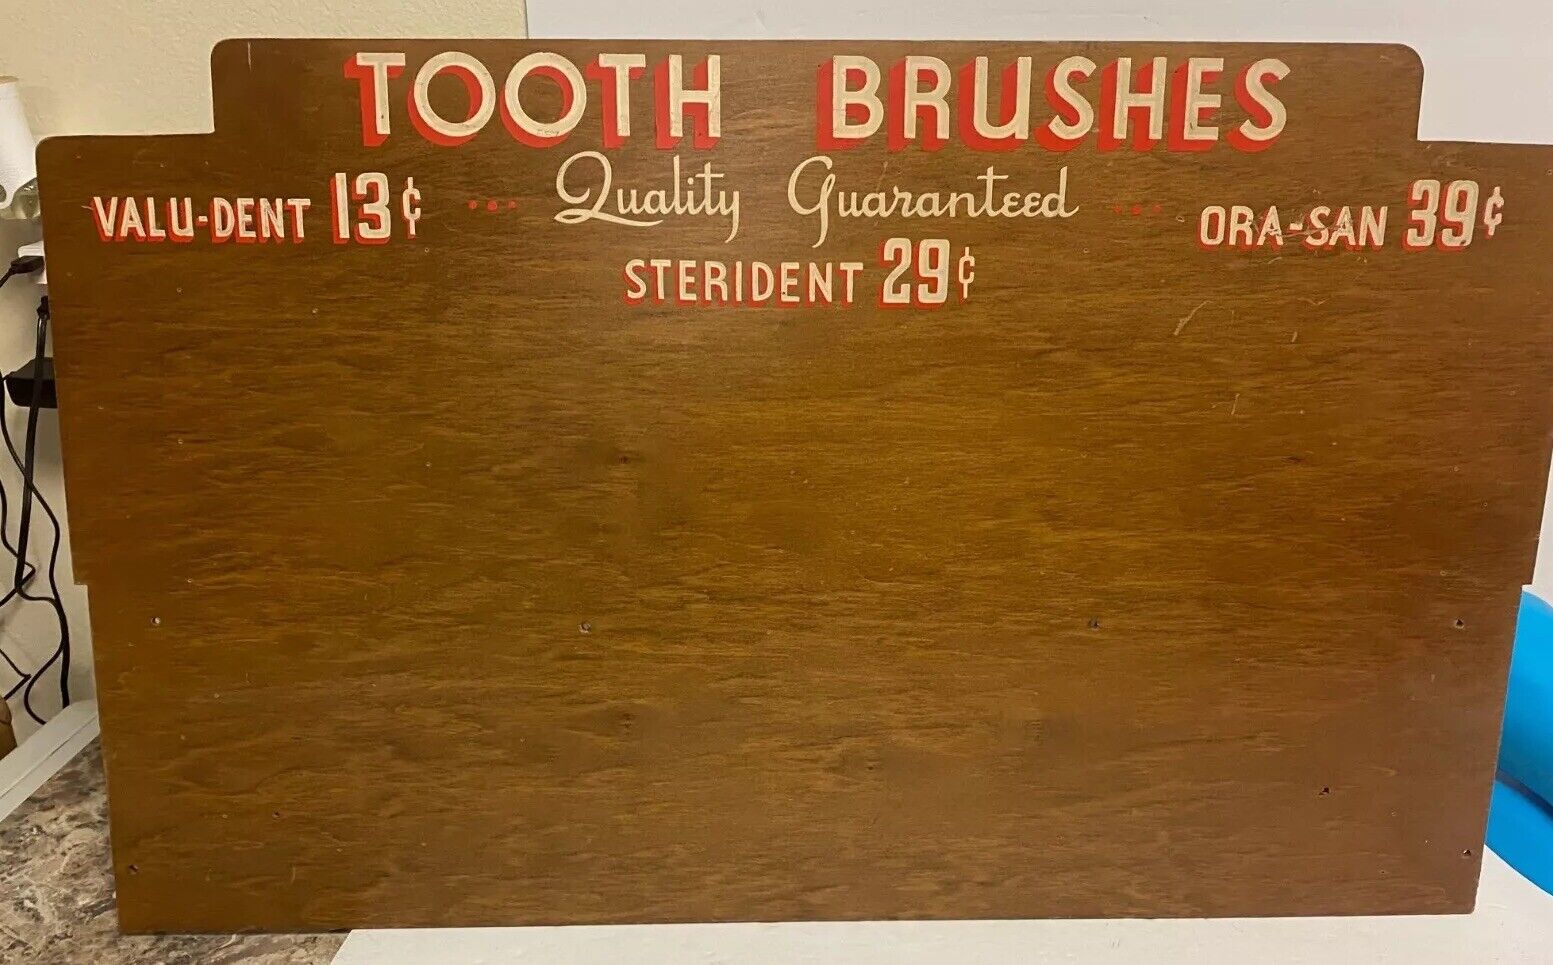 Vintage Advertising Tooth Brushes Quality Guaranteed Hanging Wall Wood Board